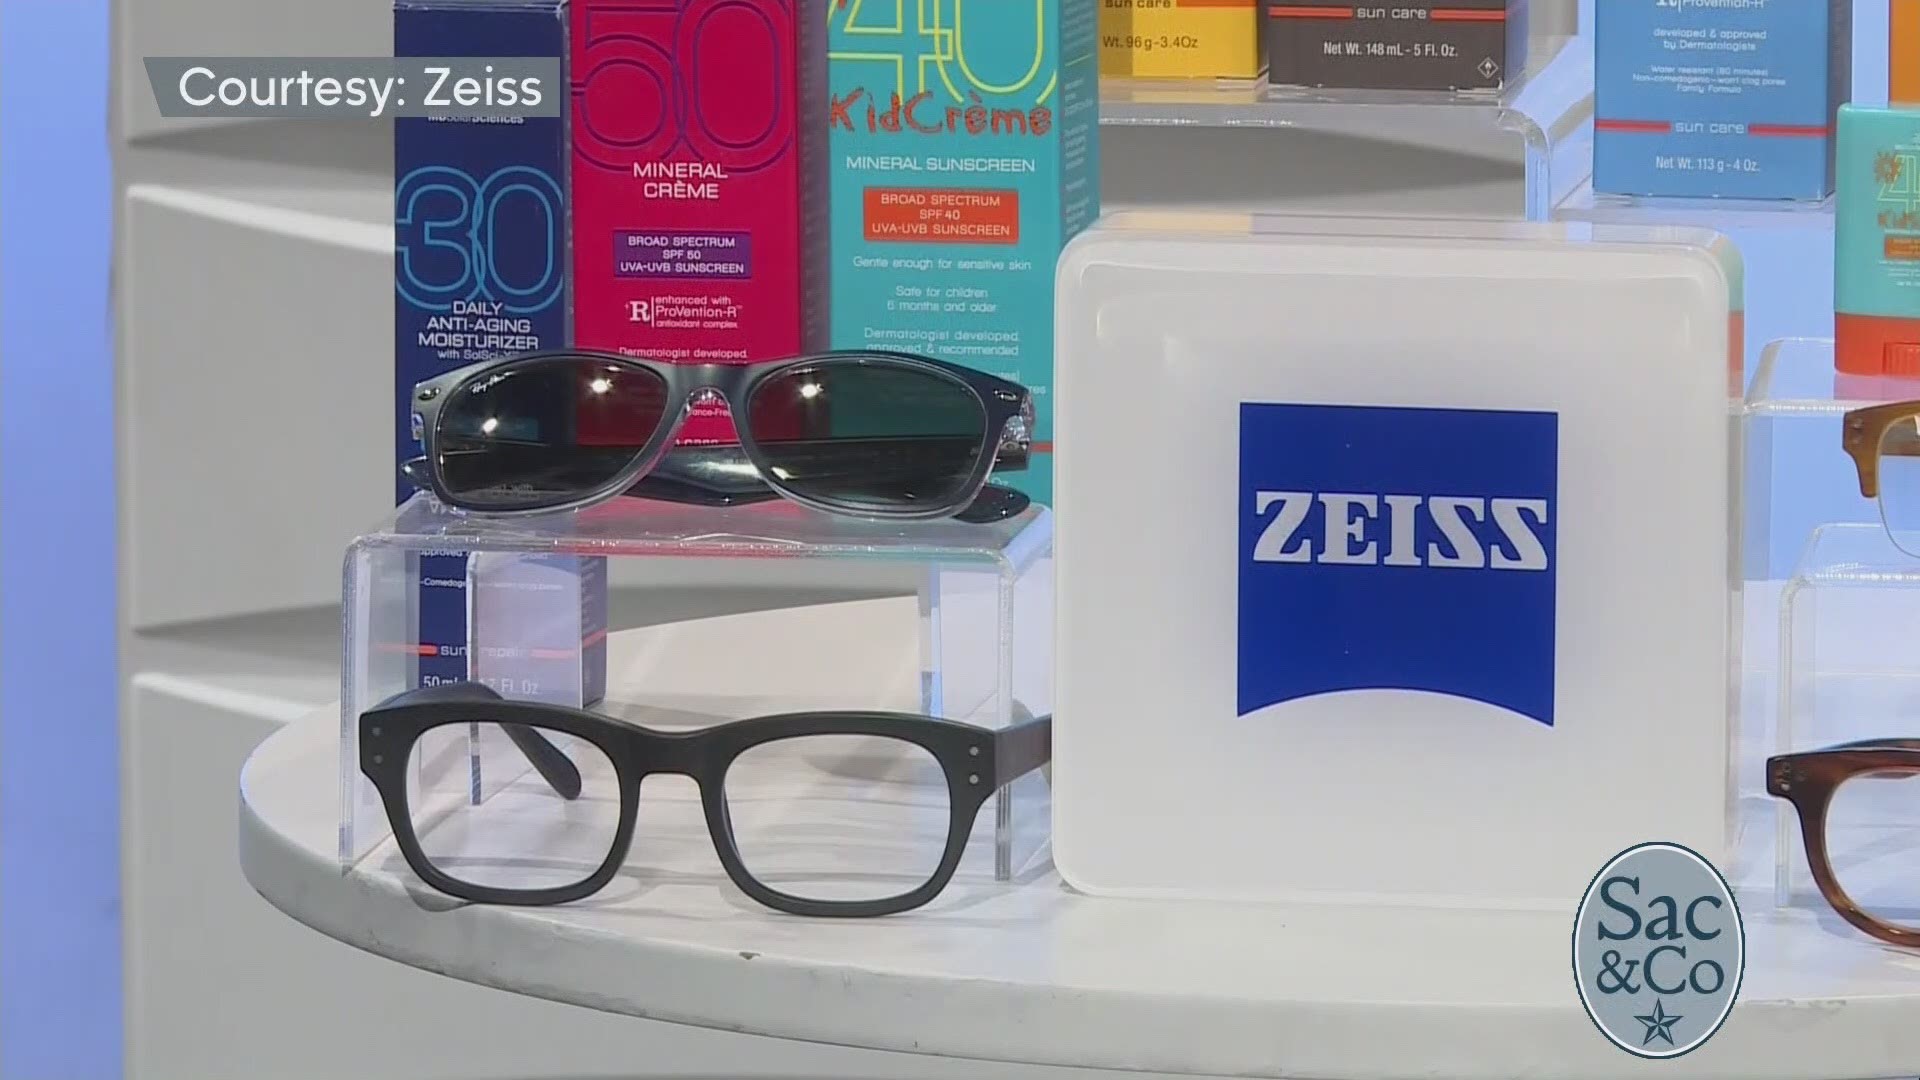 With sunnier days approaching, it’s important for people of all ages to understand the daily dangers of sun exposure. The following is a paid segment sponsored by Zeiss.